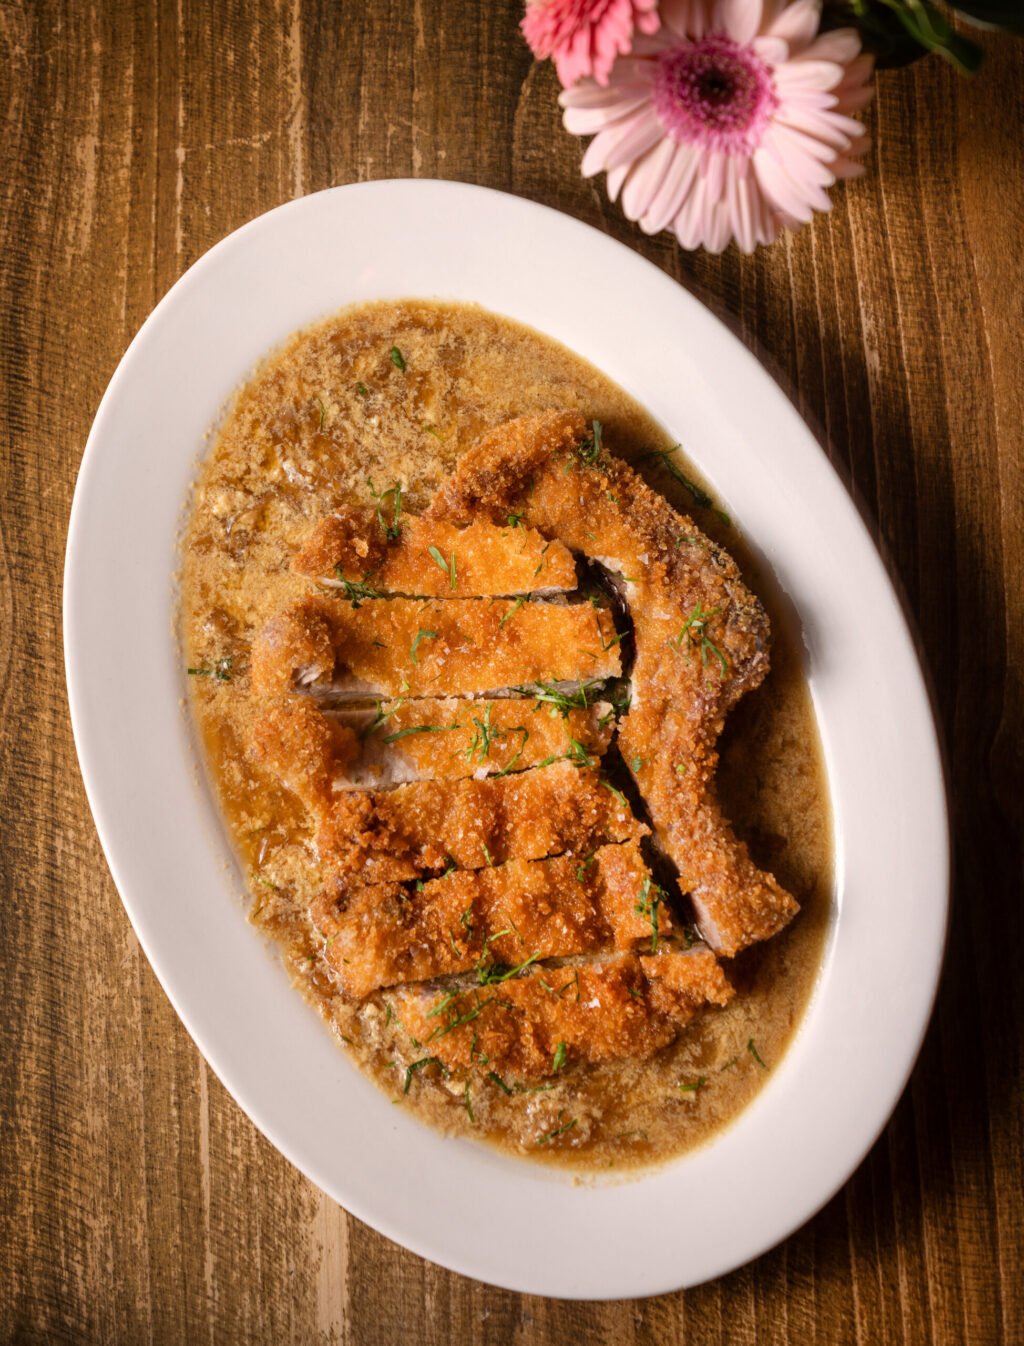 Pork Chop Tonkatsu-style with sweet onion dash broth from the Golden Bear Station Thursday, January 11, 2023 on Hwy 12 in Kenwood. (Photo John Burgess/The Press Democrat)